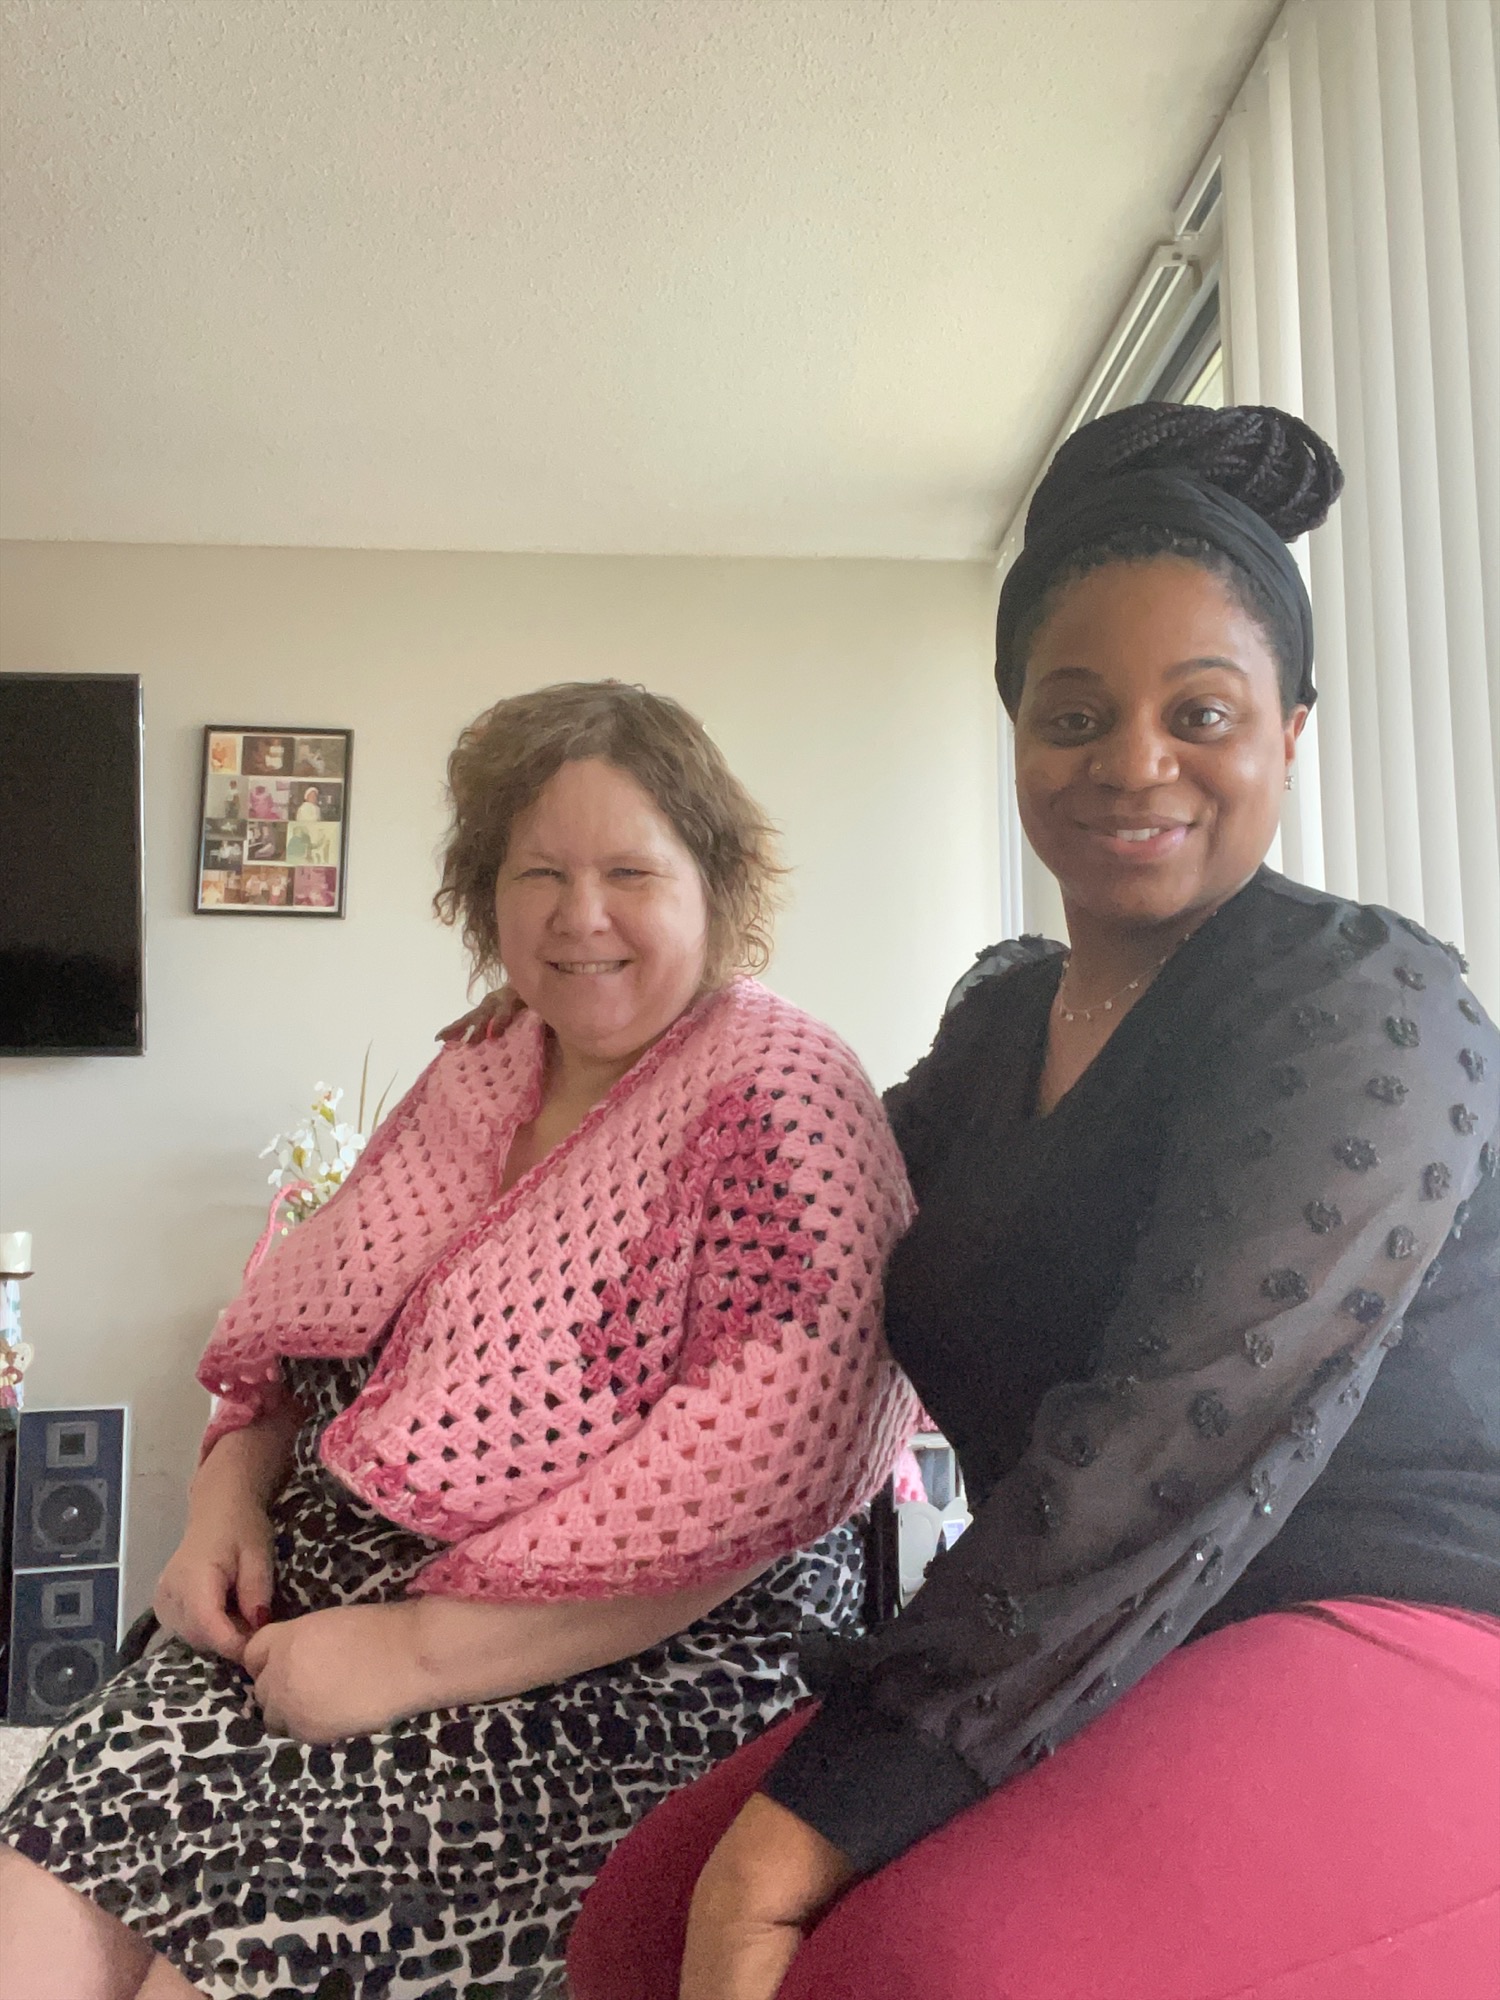 Two women sit side by side in an apartment smiling